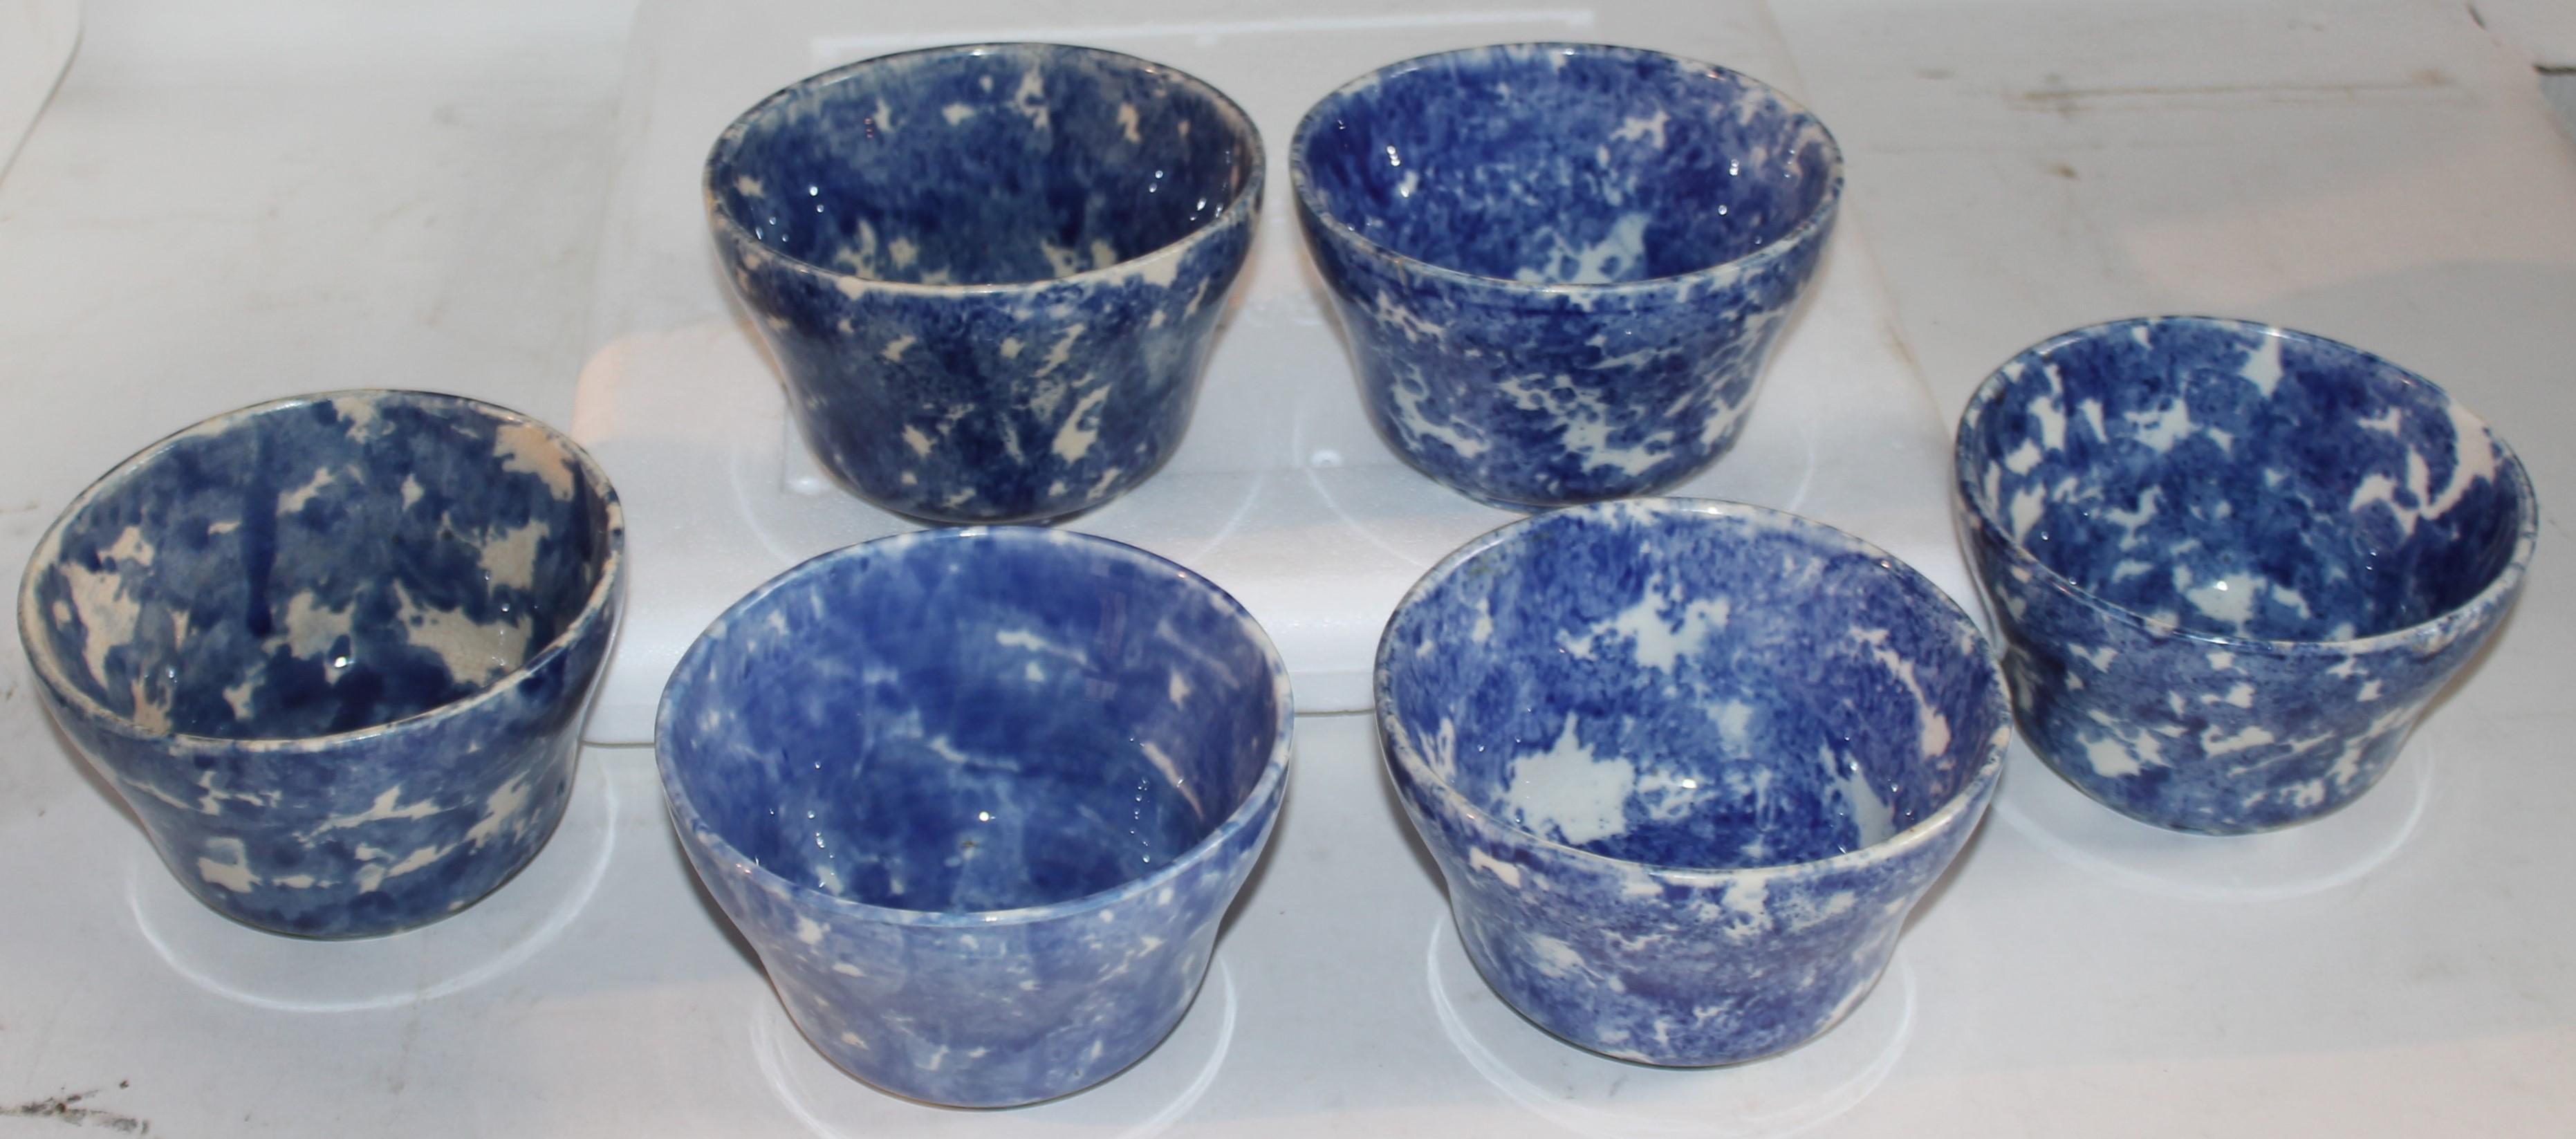 19thc collection of six sponge ware waste bowls in pristine condition. These are quite rare and hard to find in mint condition.